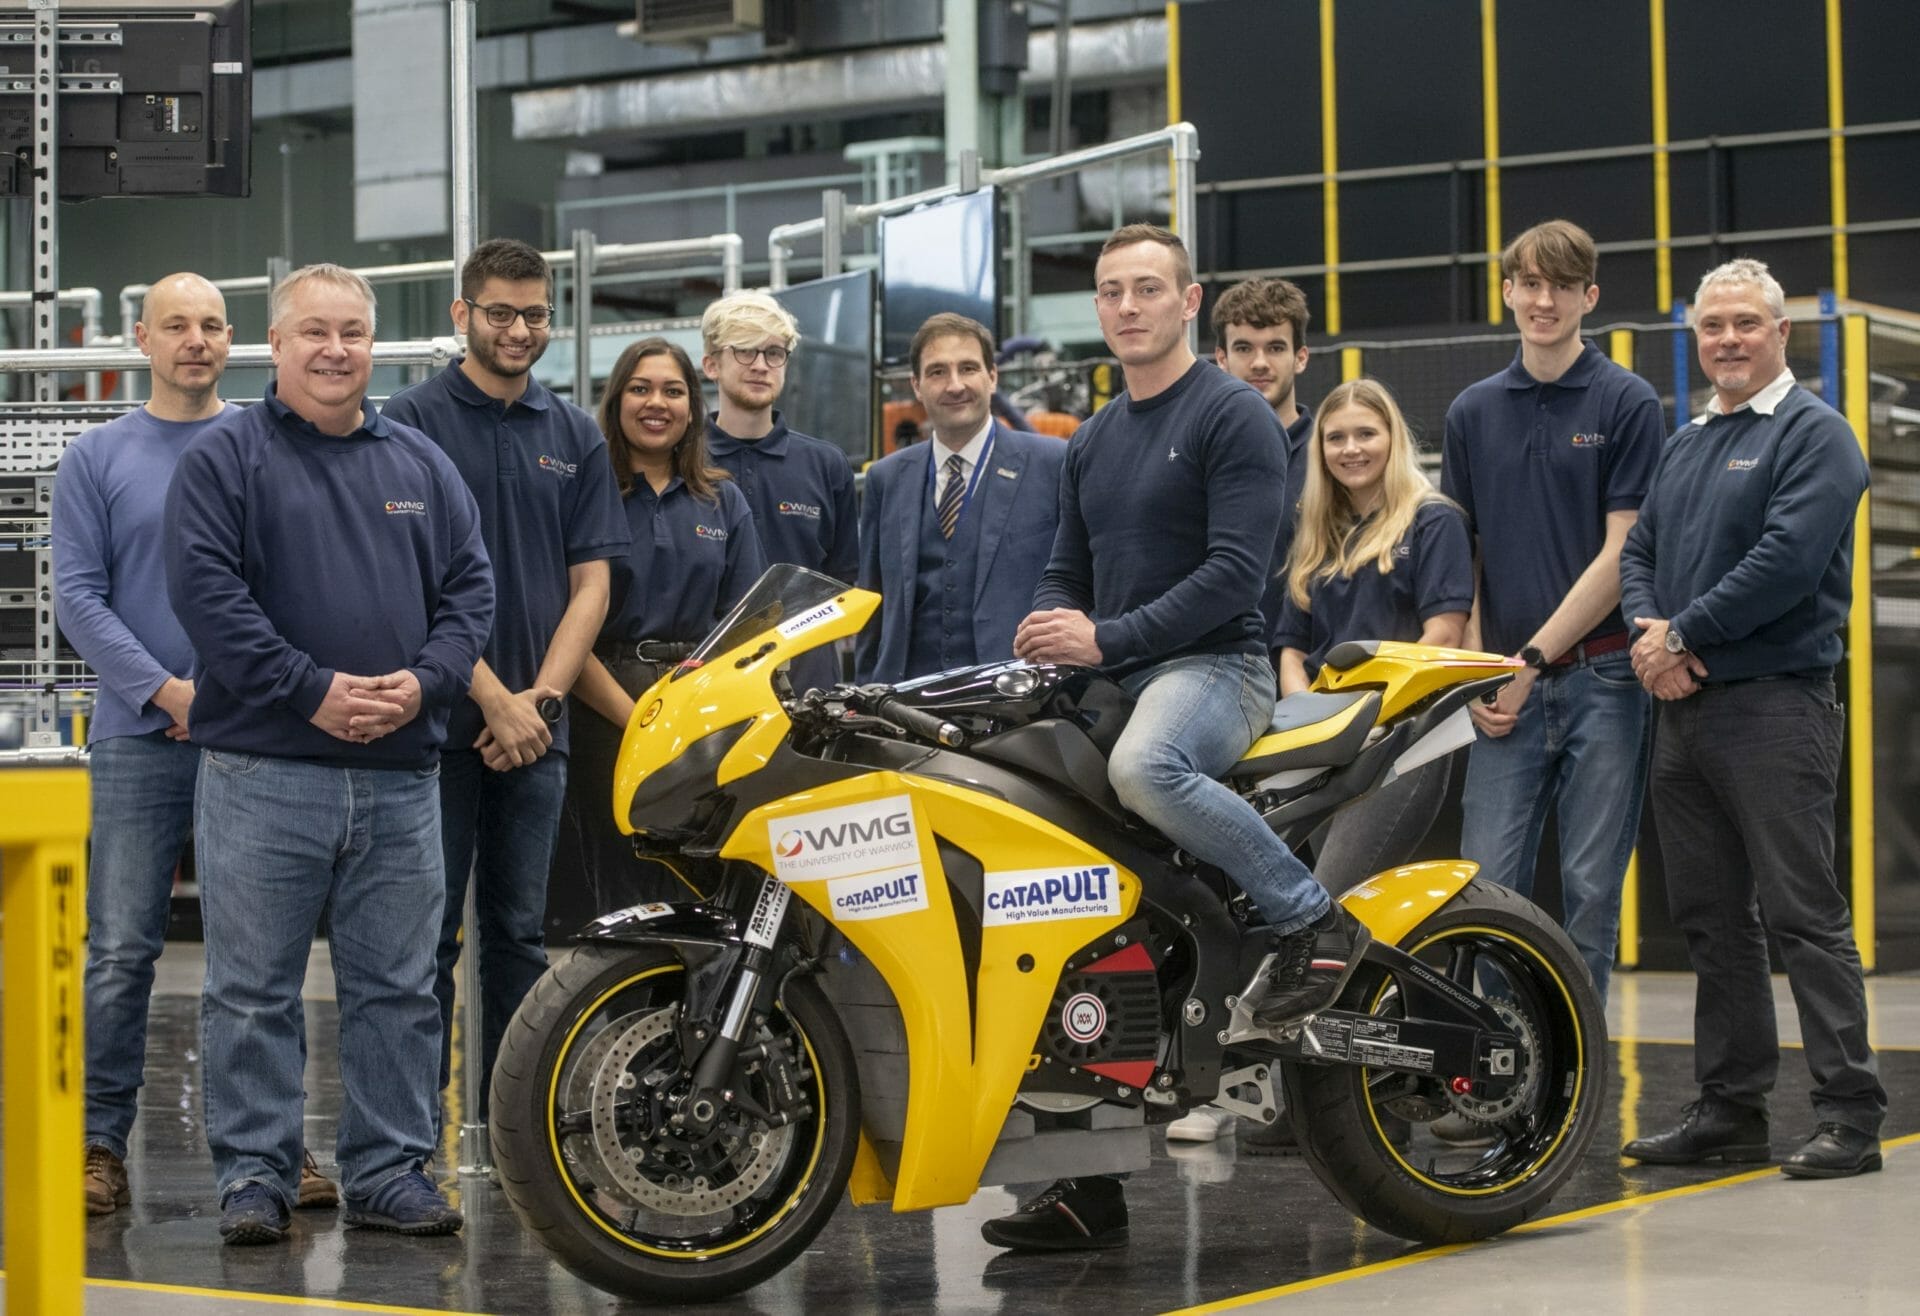 The University of Warwick builds electric superbike for the race track
- also in the MOTORCYCLE NEWS APP